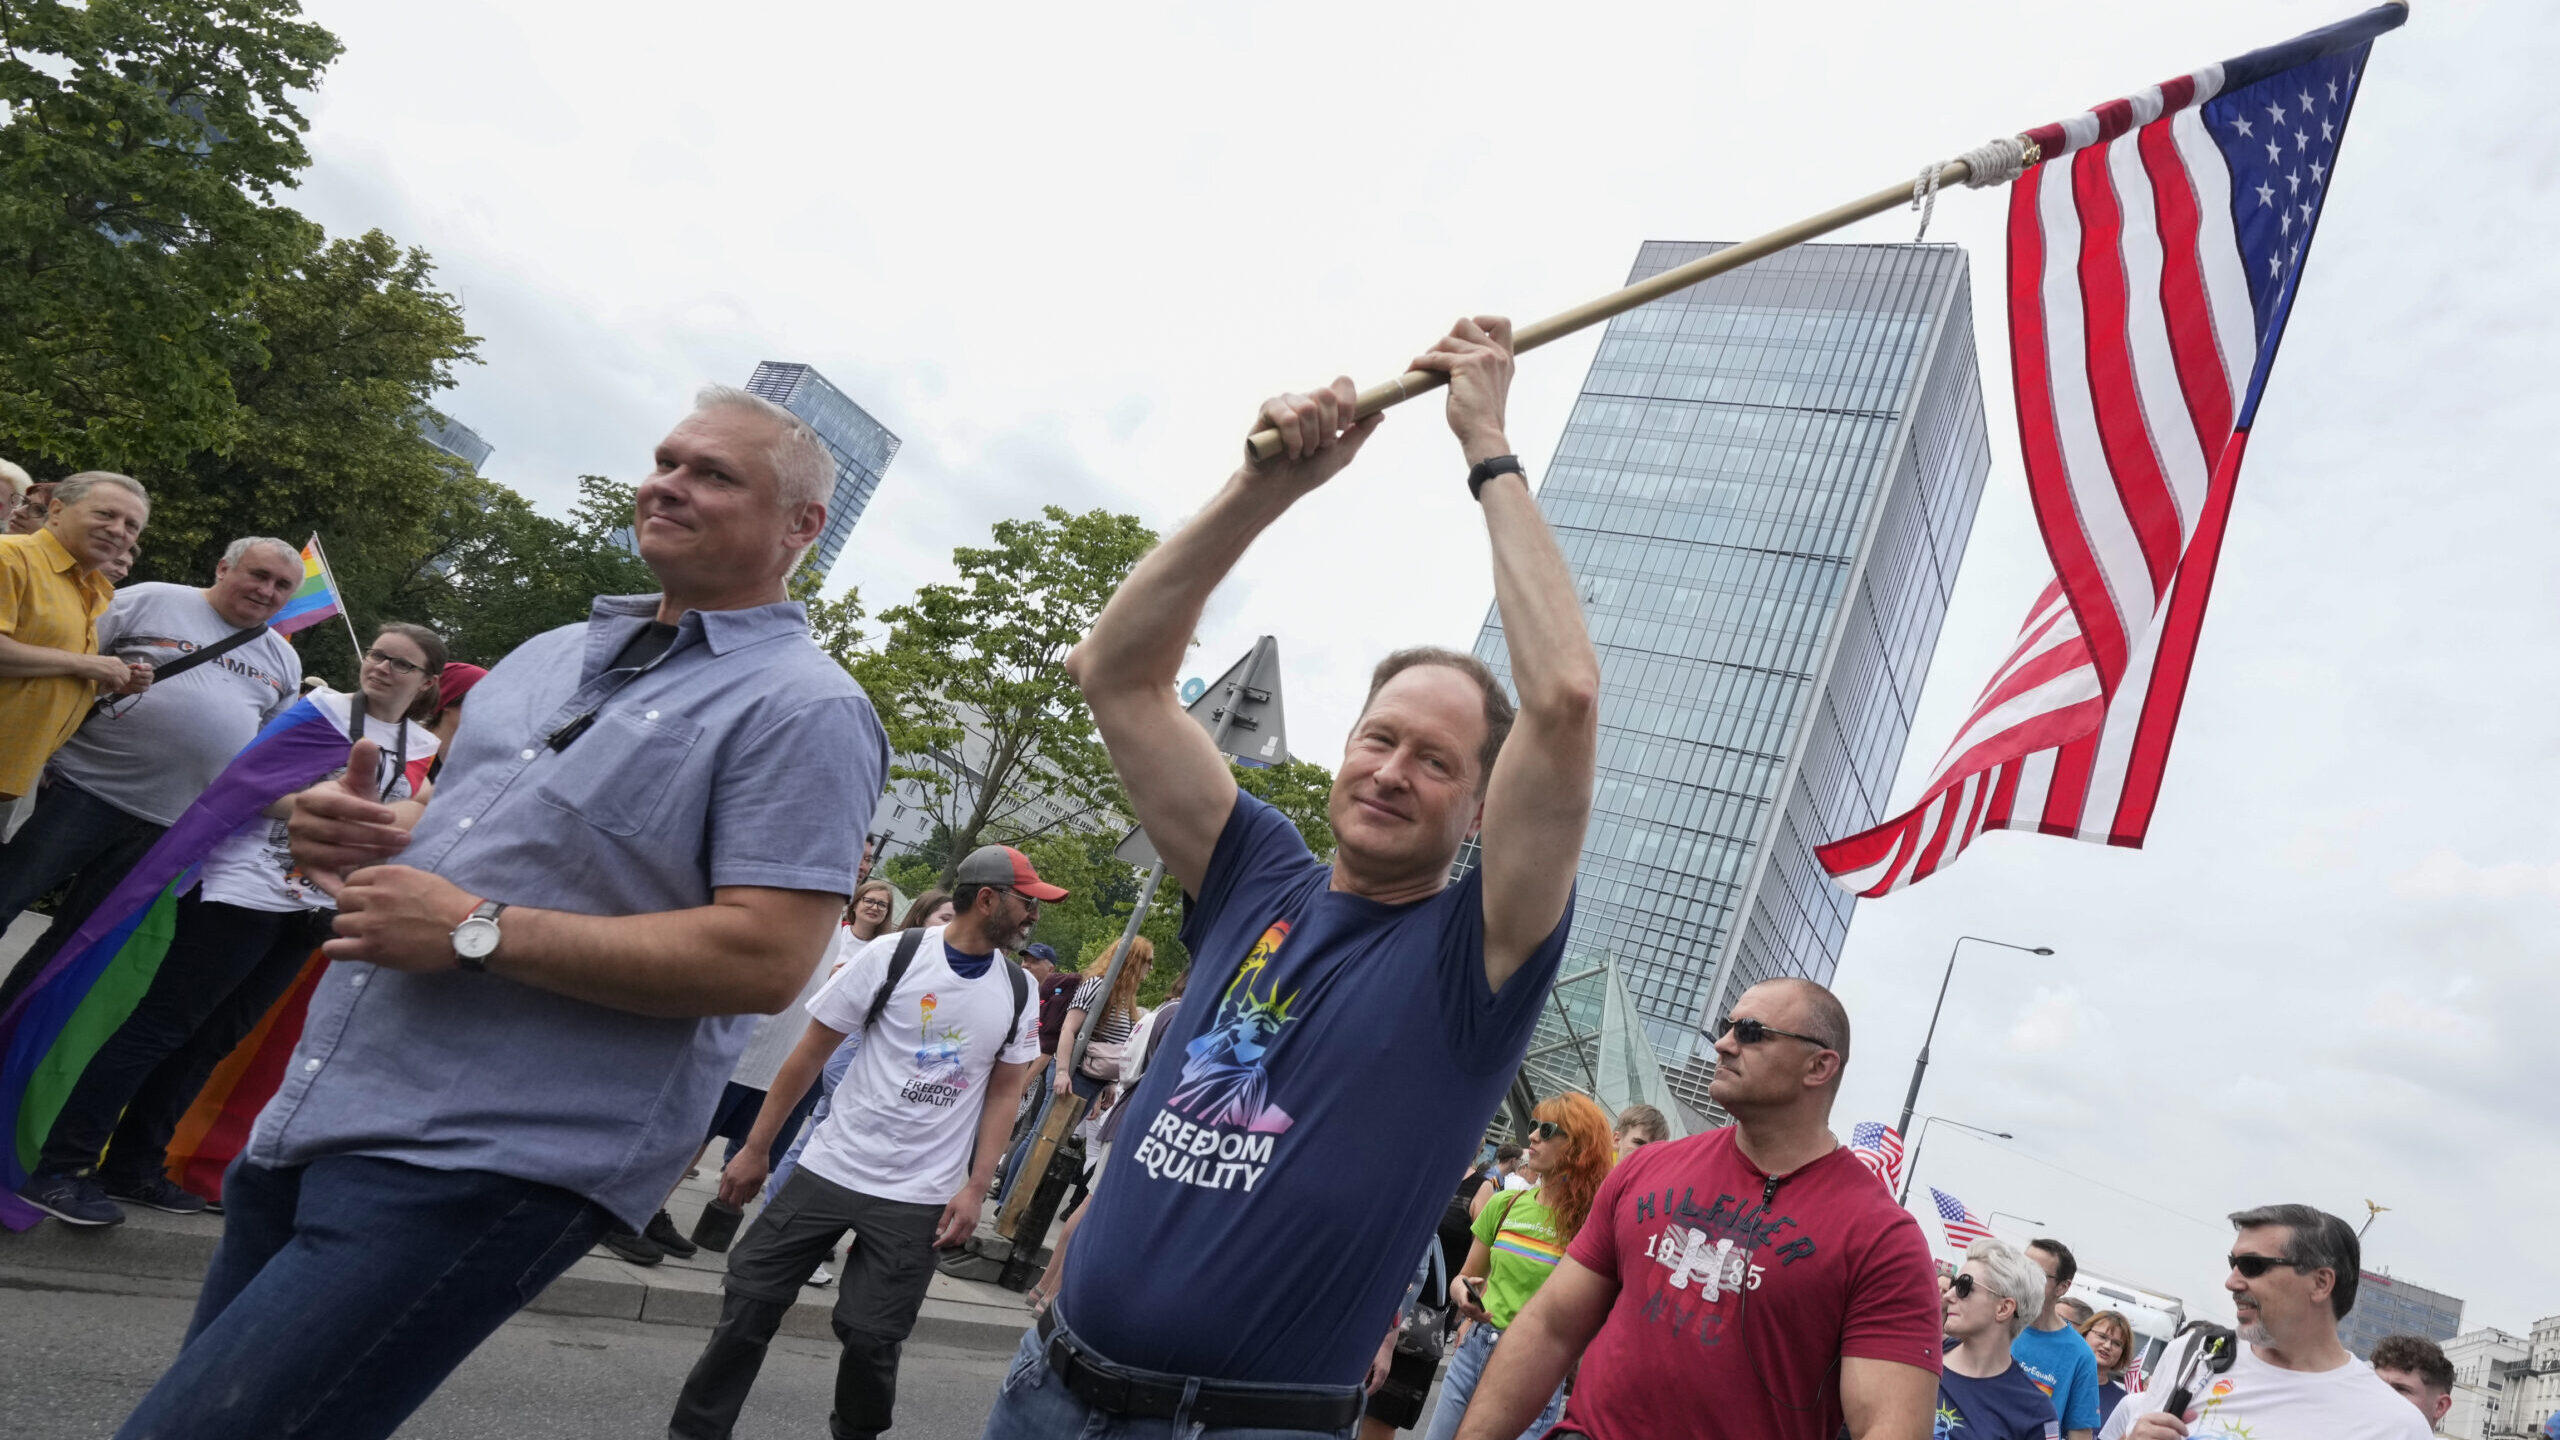 The United States ambassador held a U.S. flag high as he marched in the yearly Pride parade in Wars...